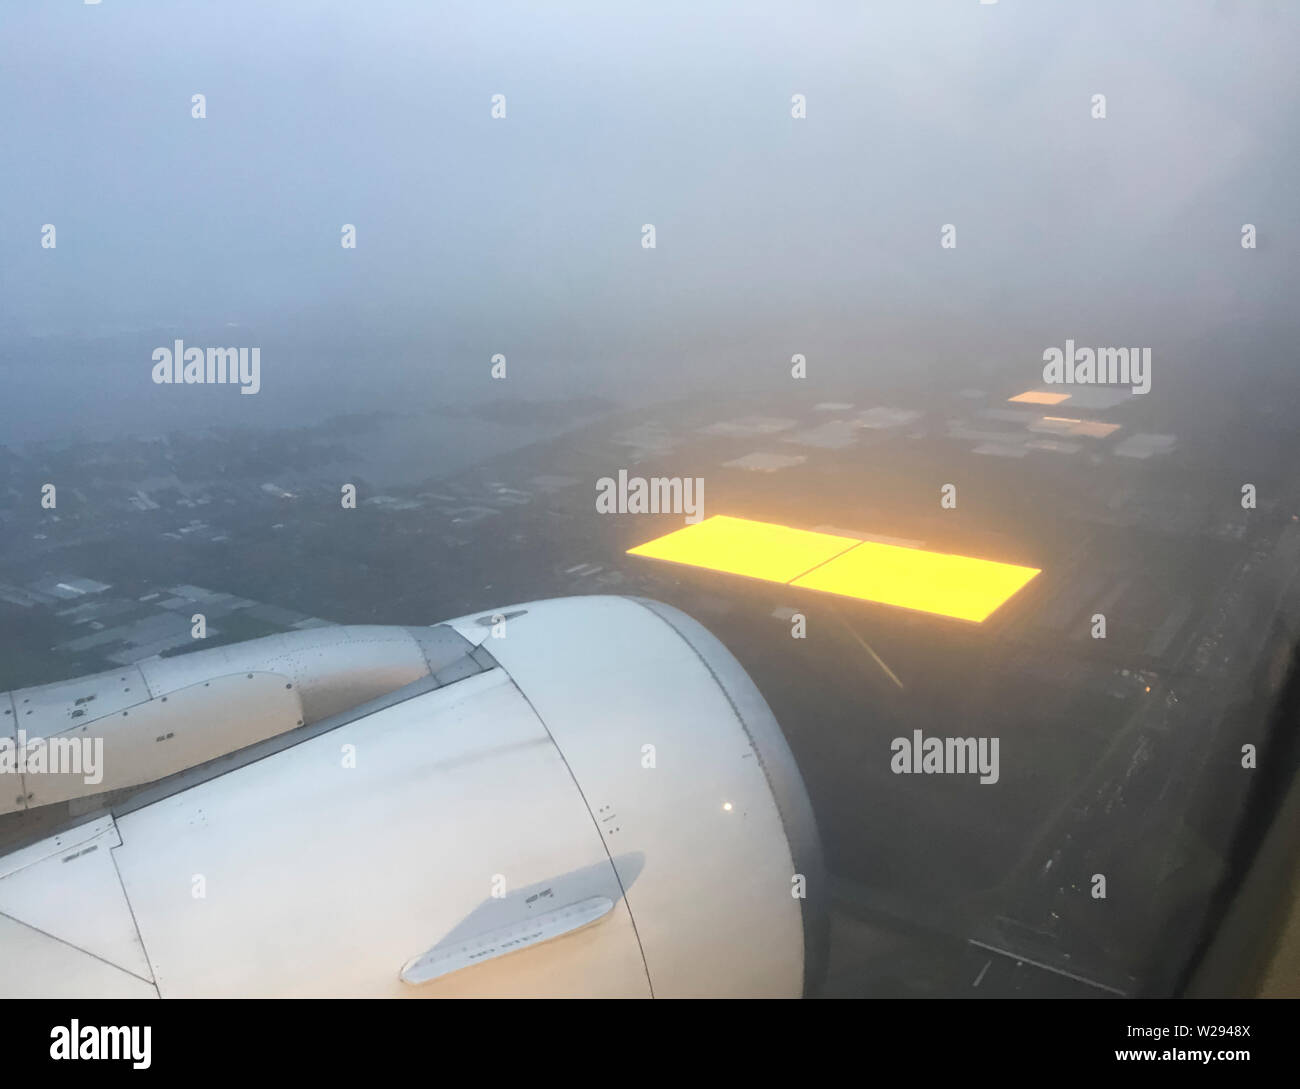 Schiphol, Netherlands - 21 December 2018: Aerial photograph of a large agricultural greenhouses in the Netherlands that are illuminated inside for better growth of the farm products during wintertime. Picture taken from a landing aircraft approaching Amsterdam Schiphol airport at early morning. Stock Photo